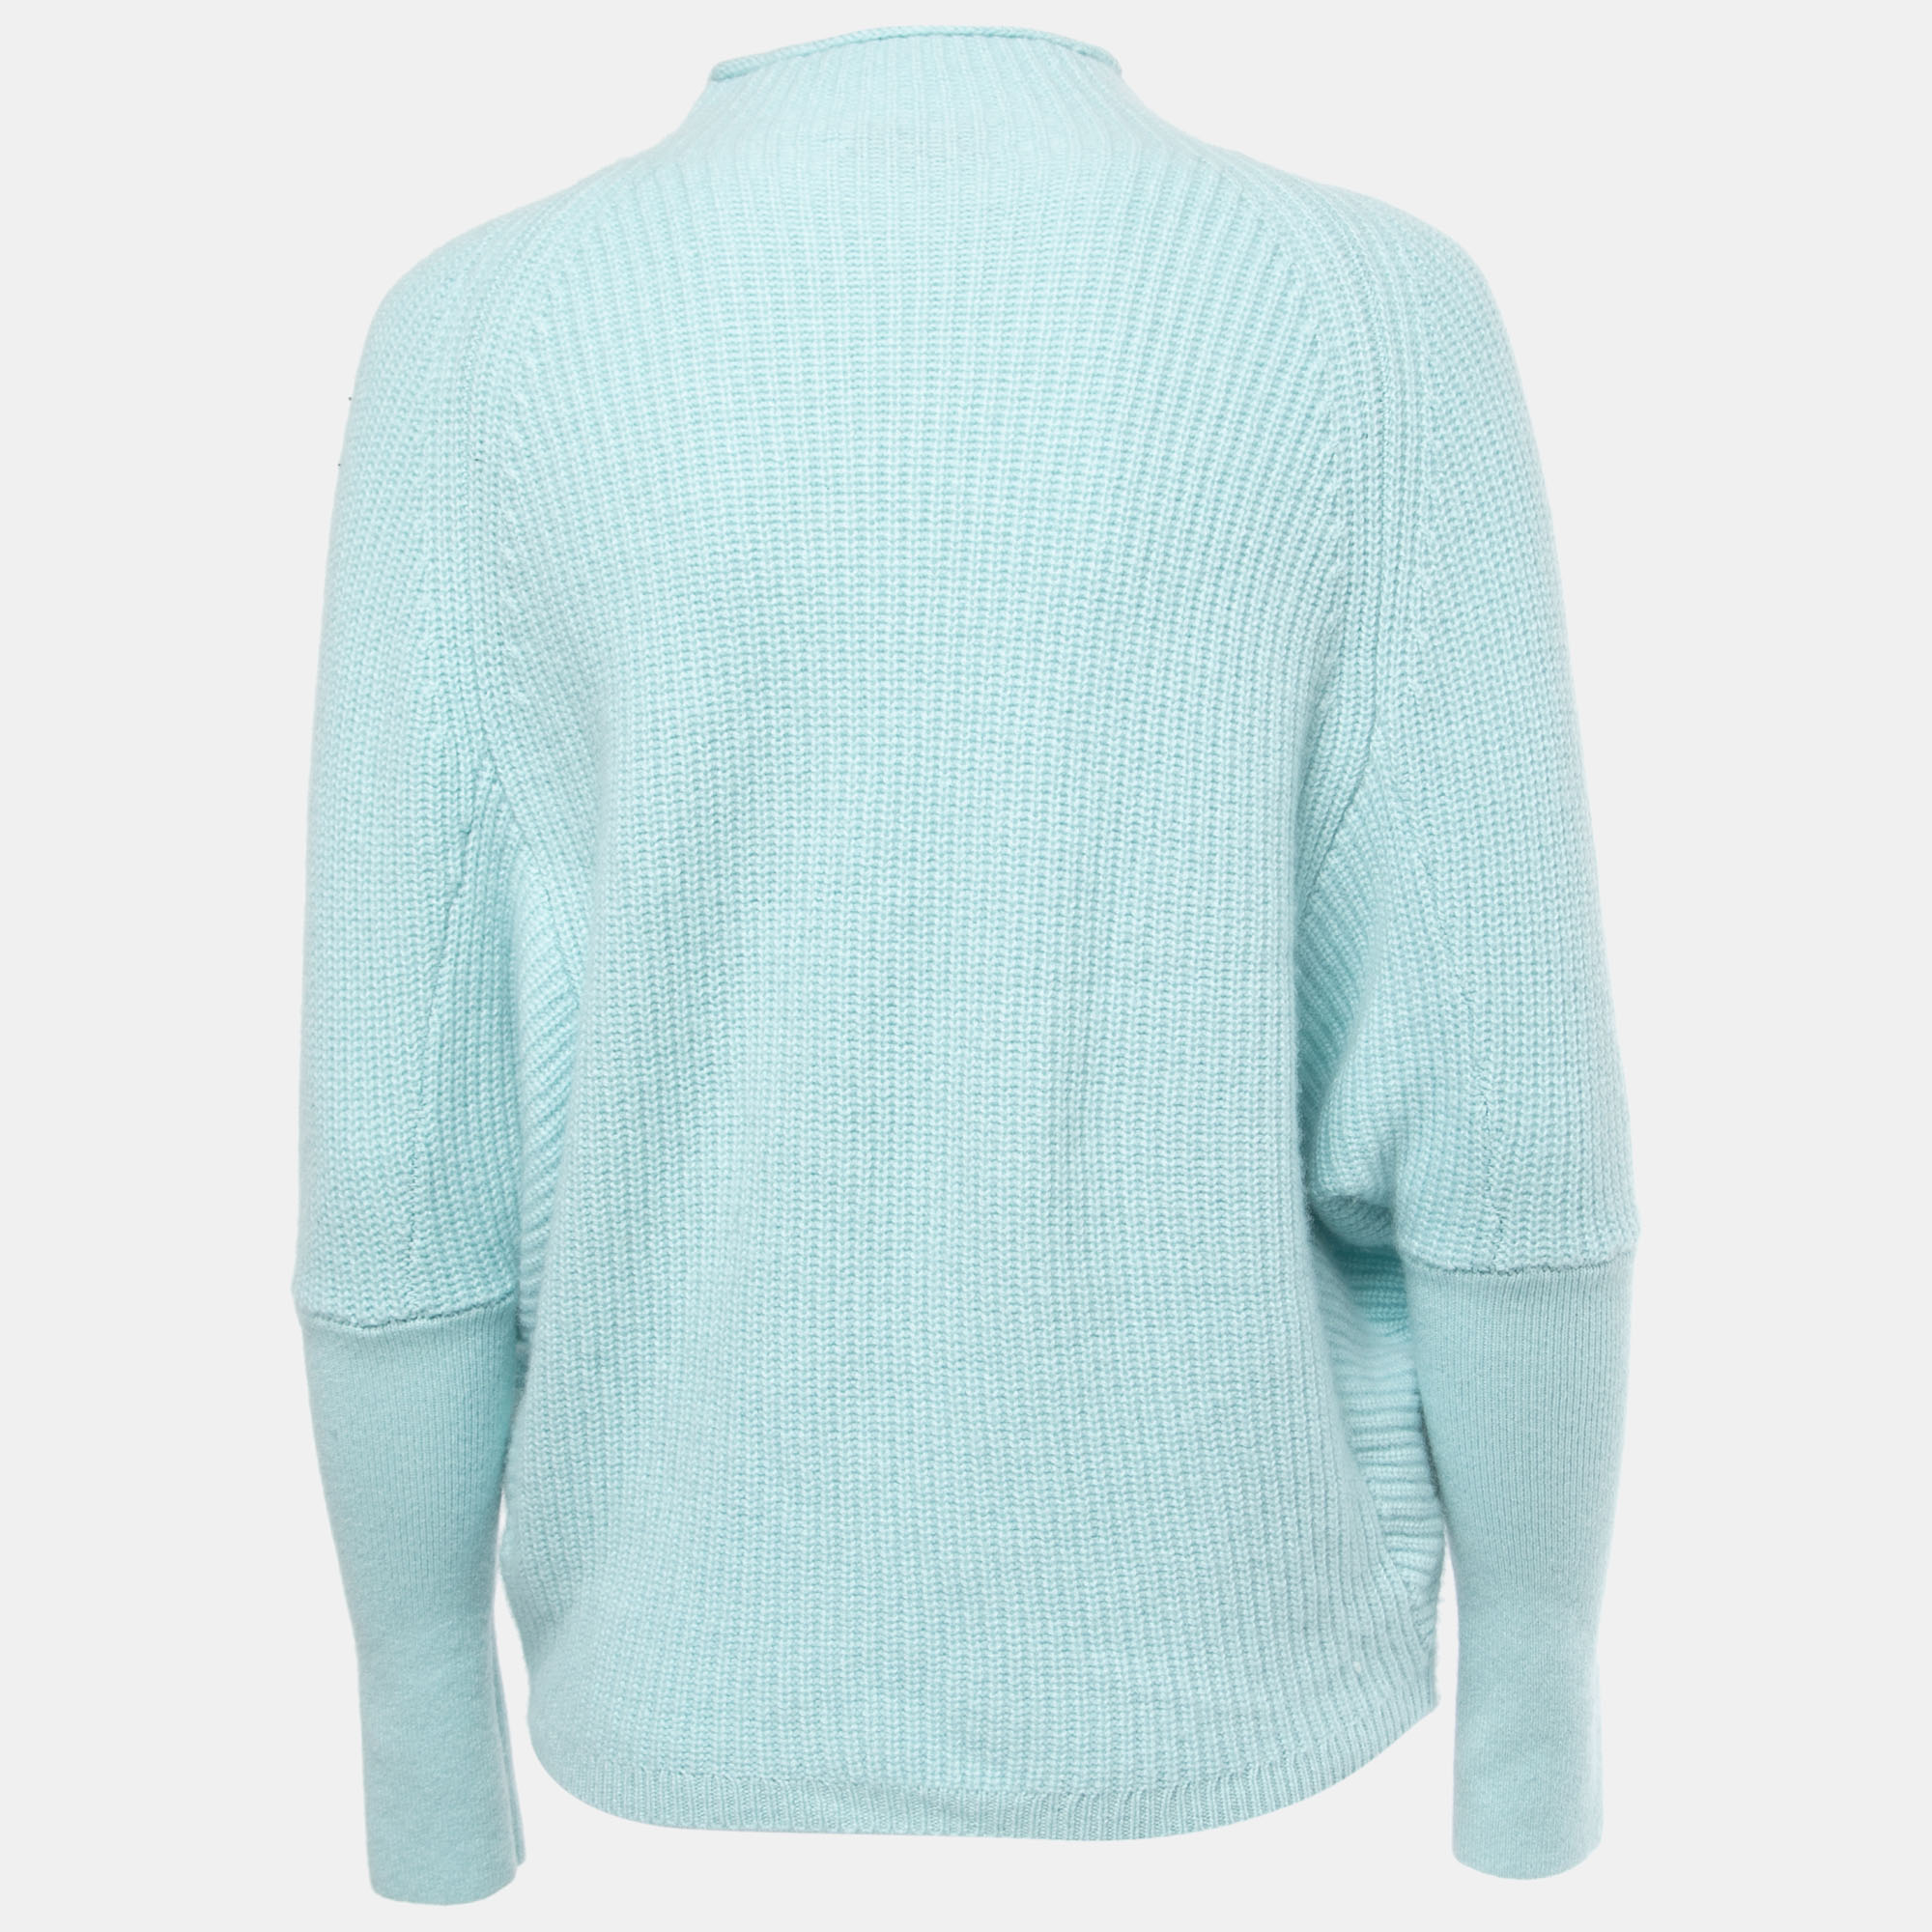 

Lucy Nagle Light Blue Cashmere Turtle Neck Sweater